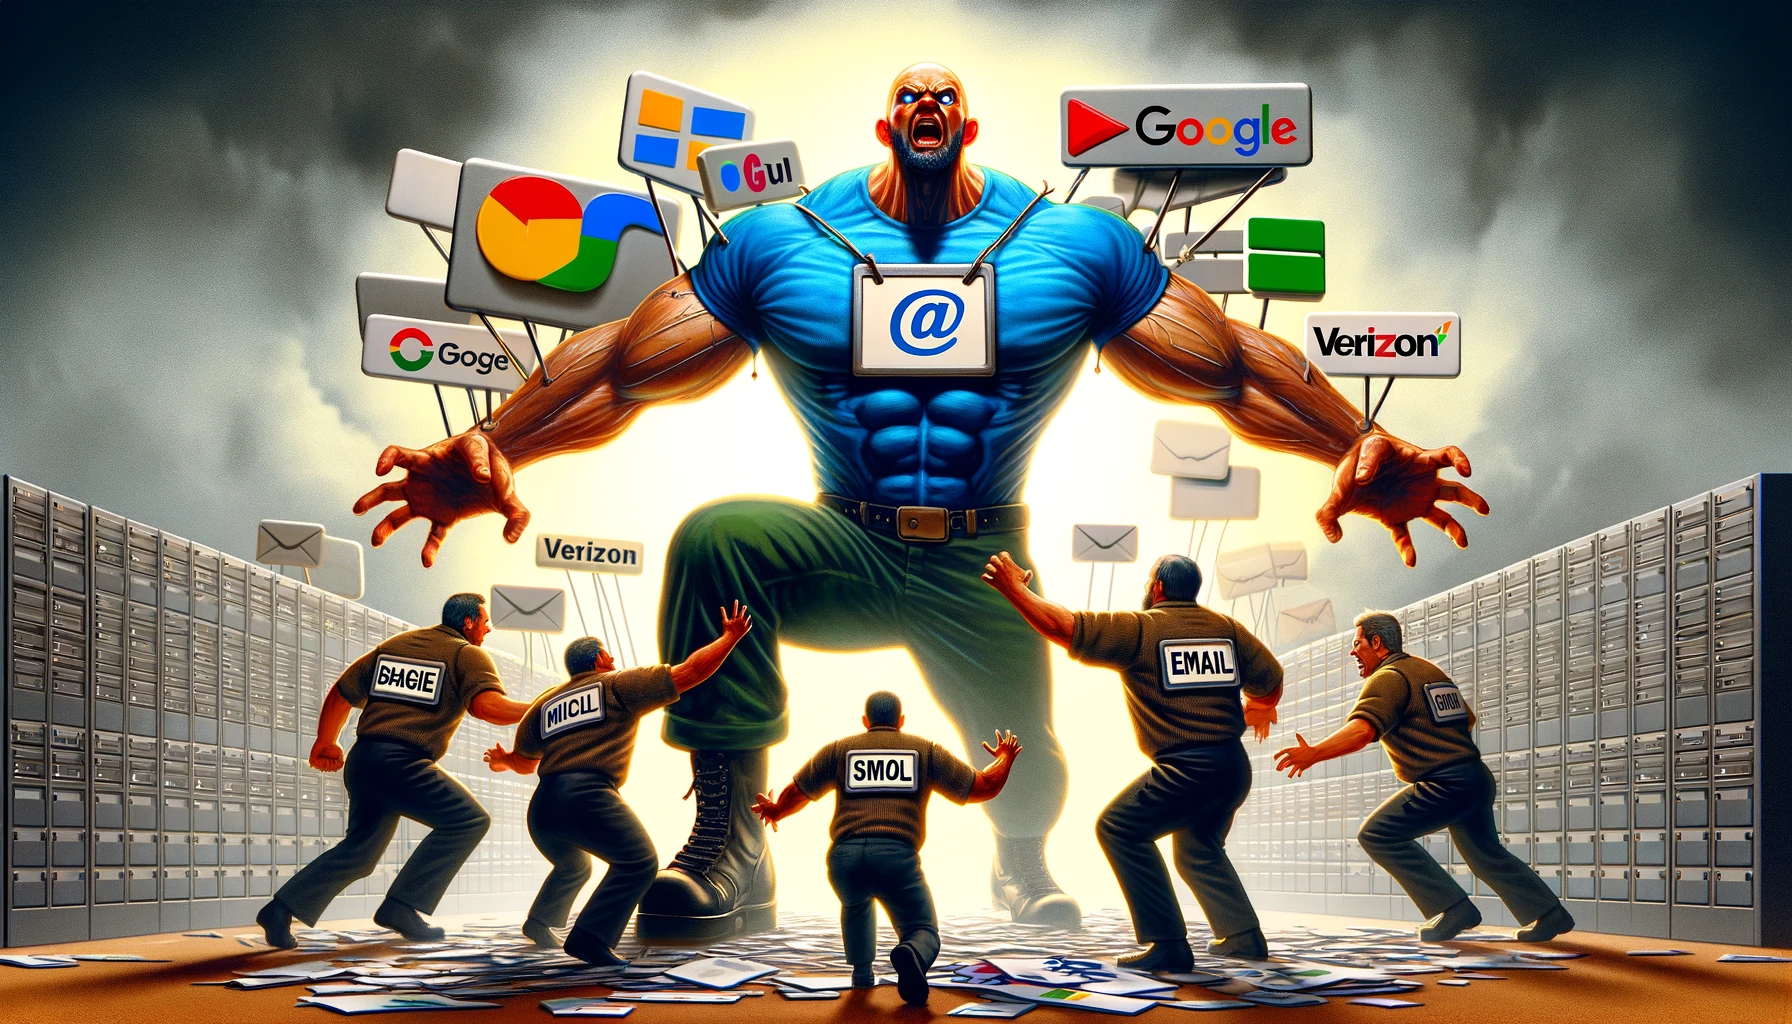 dramatic scene where large figures representing big email companies like Google Microsoft Verizon are aggressively pushing back or blocking smaller ones